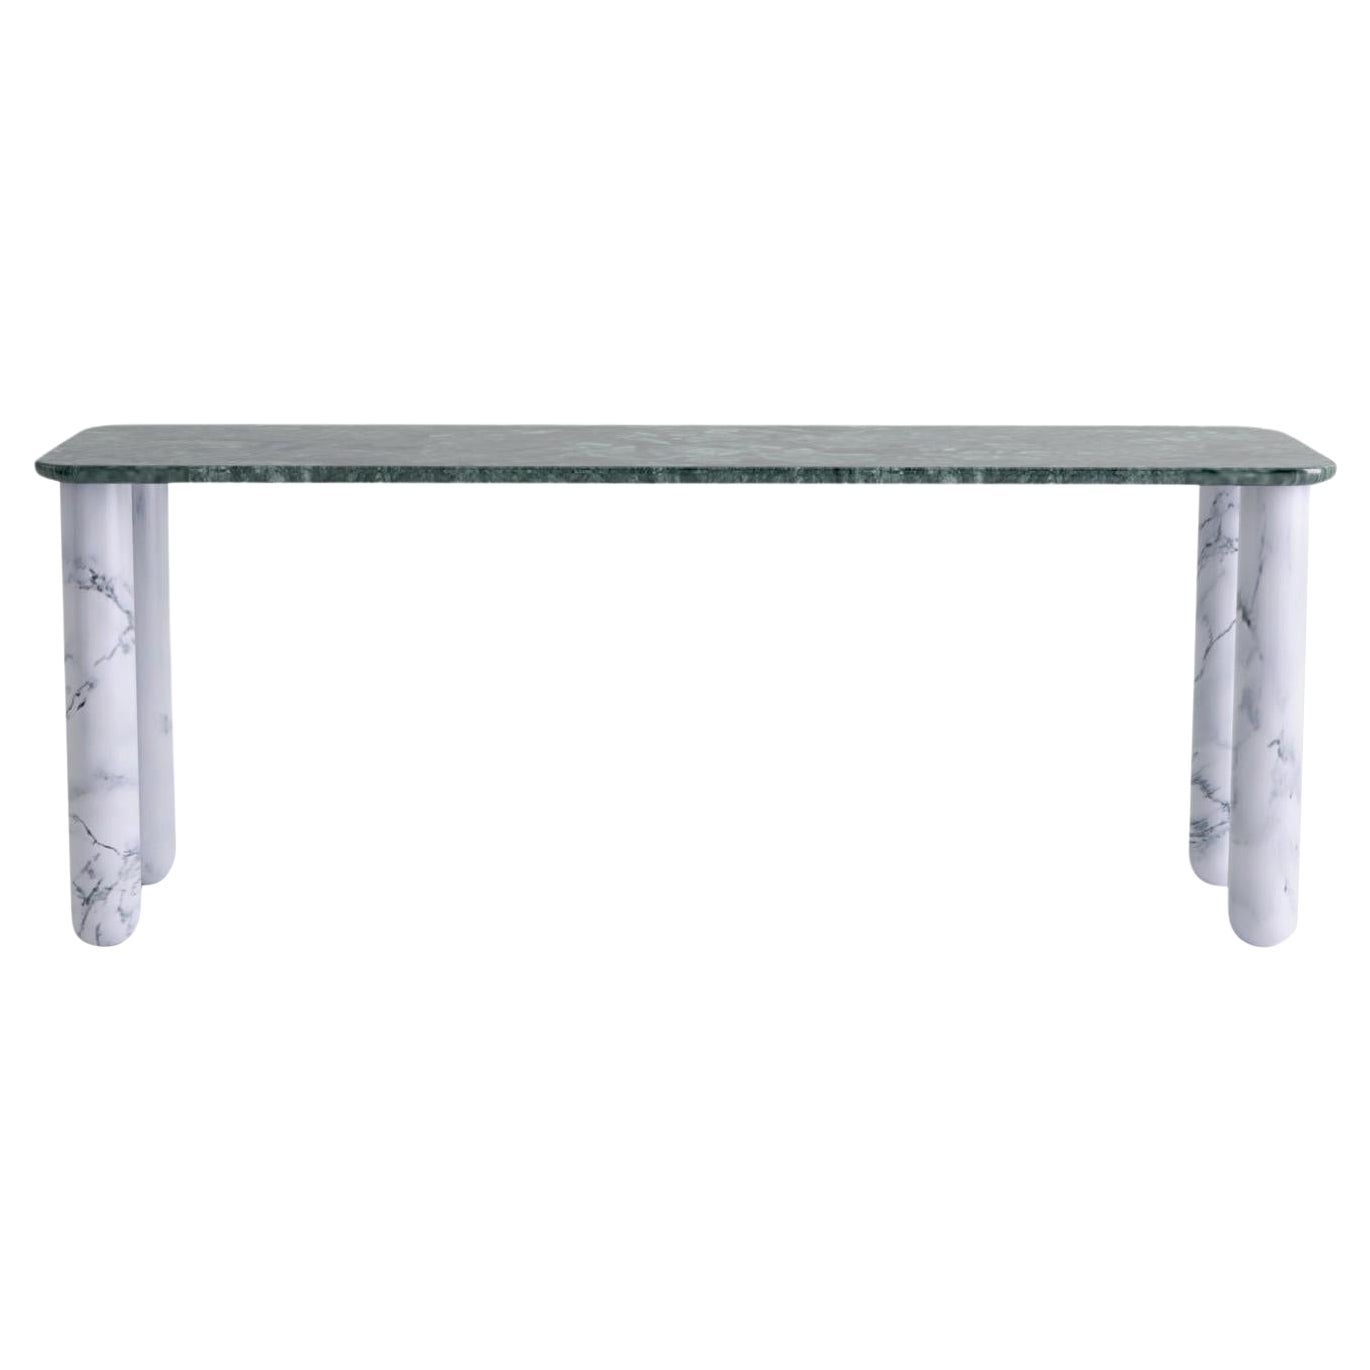 Large Green and White Marble "Sunday" Dining Table, Jean-Baptiste Souletie